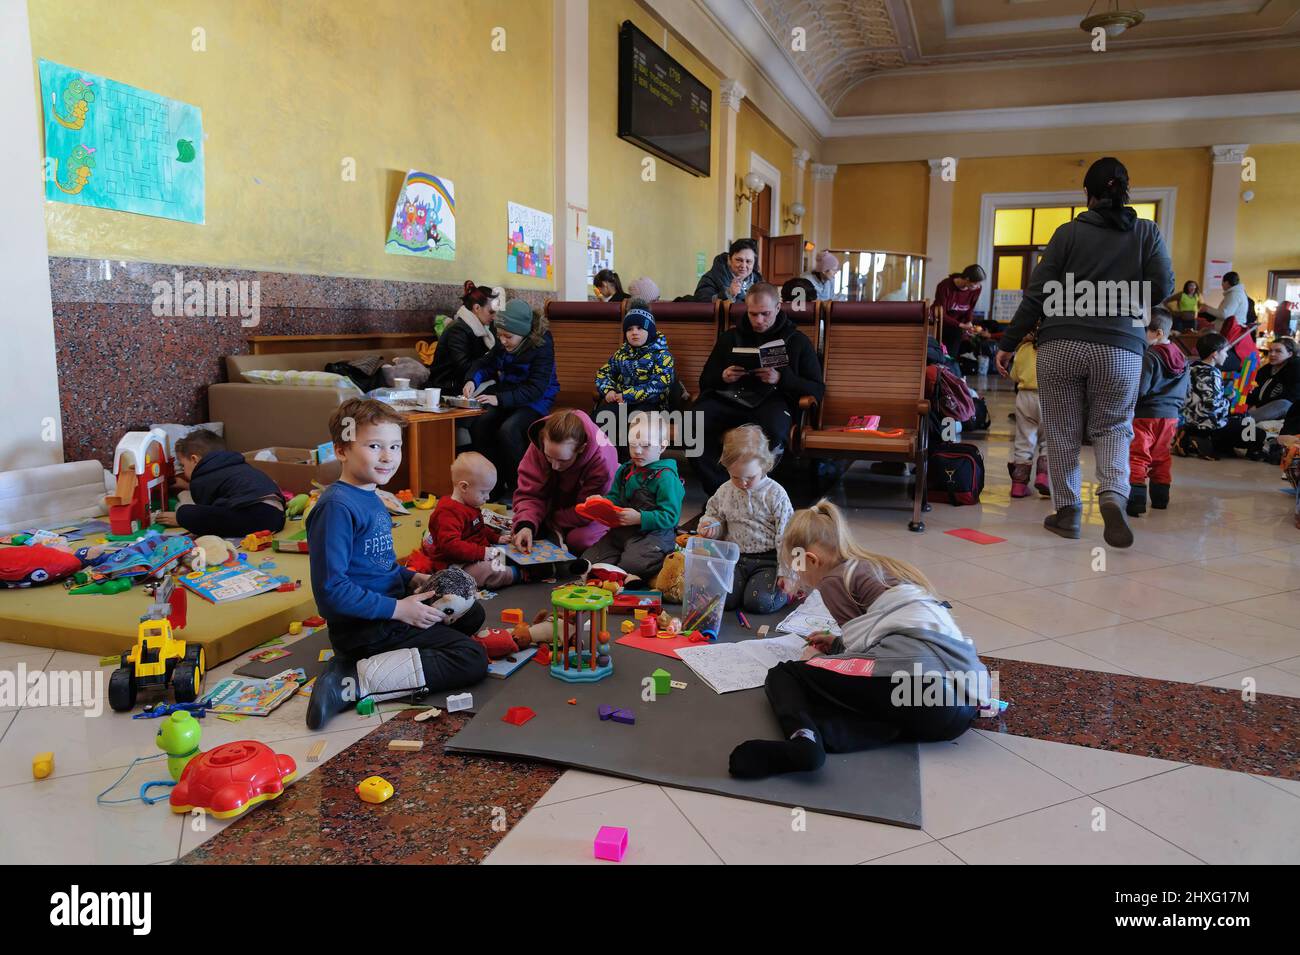 Children seen in a room for women and children who fled the Russian invasion in the VIP room at the railway station in Lviv. Russian troops entered Ukraine on 24 February. Stock Photo